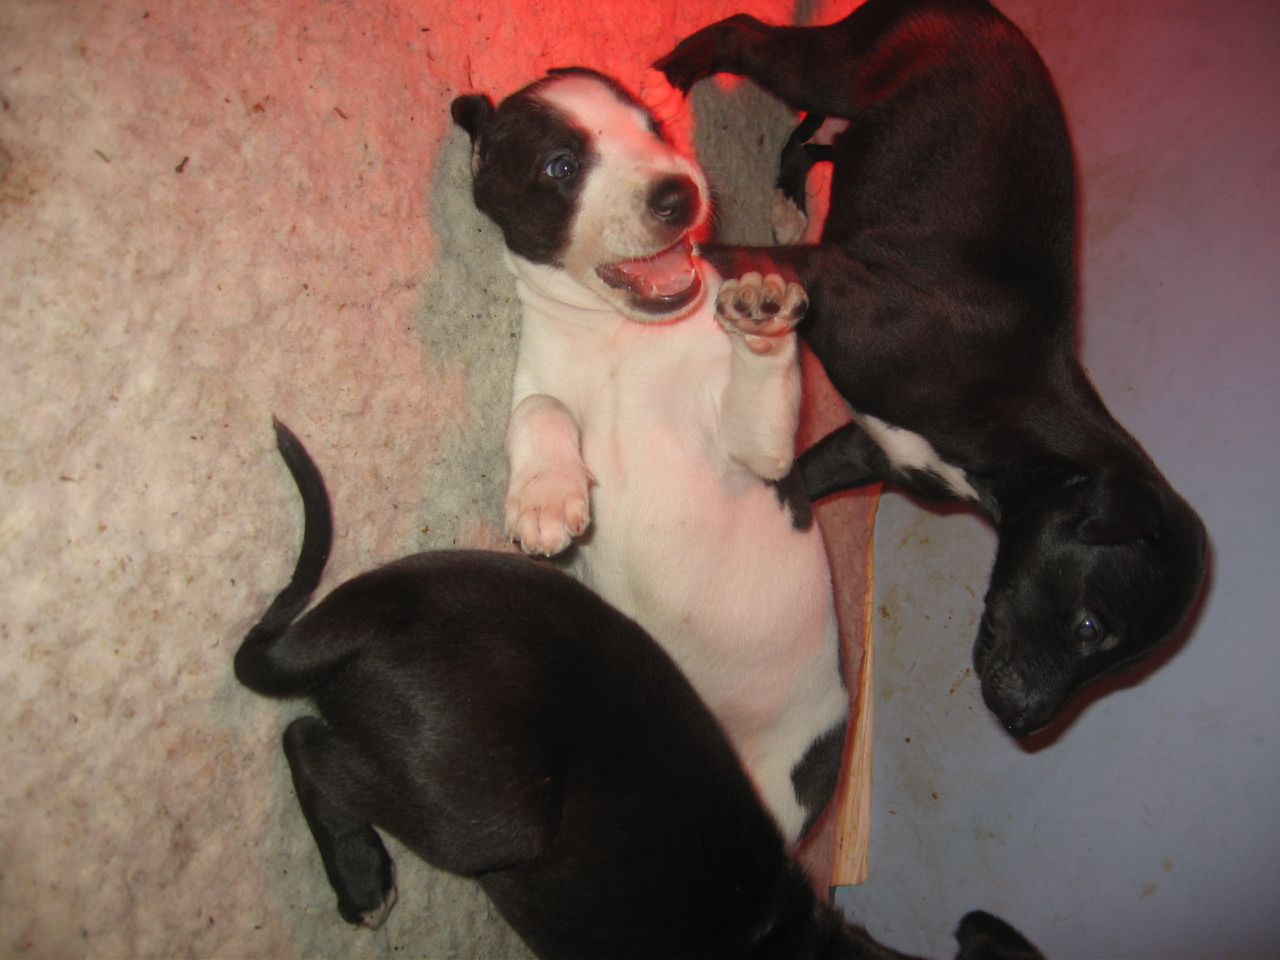 five black and white puppies playing around on the floor